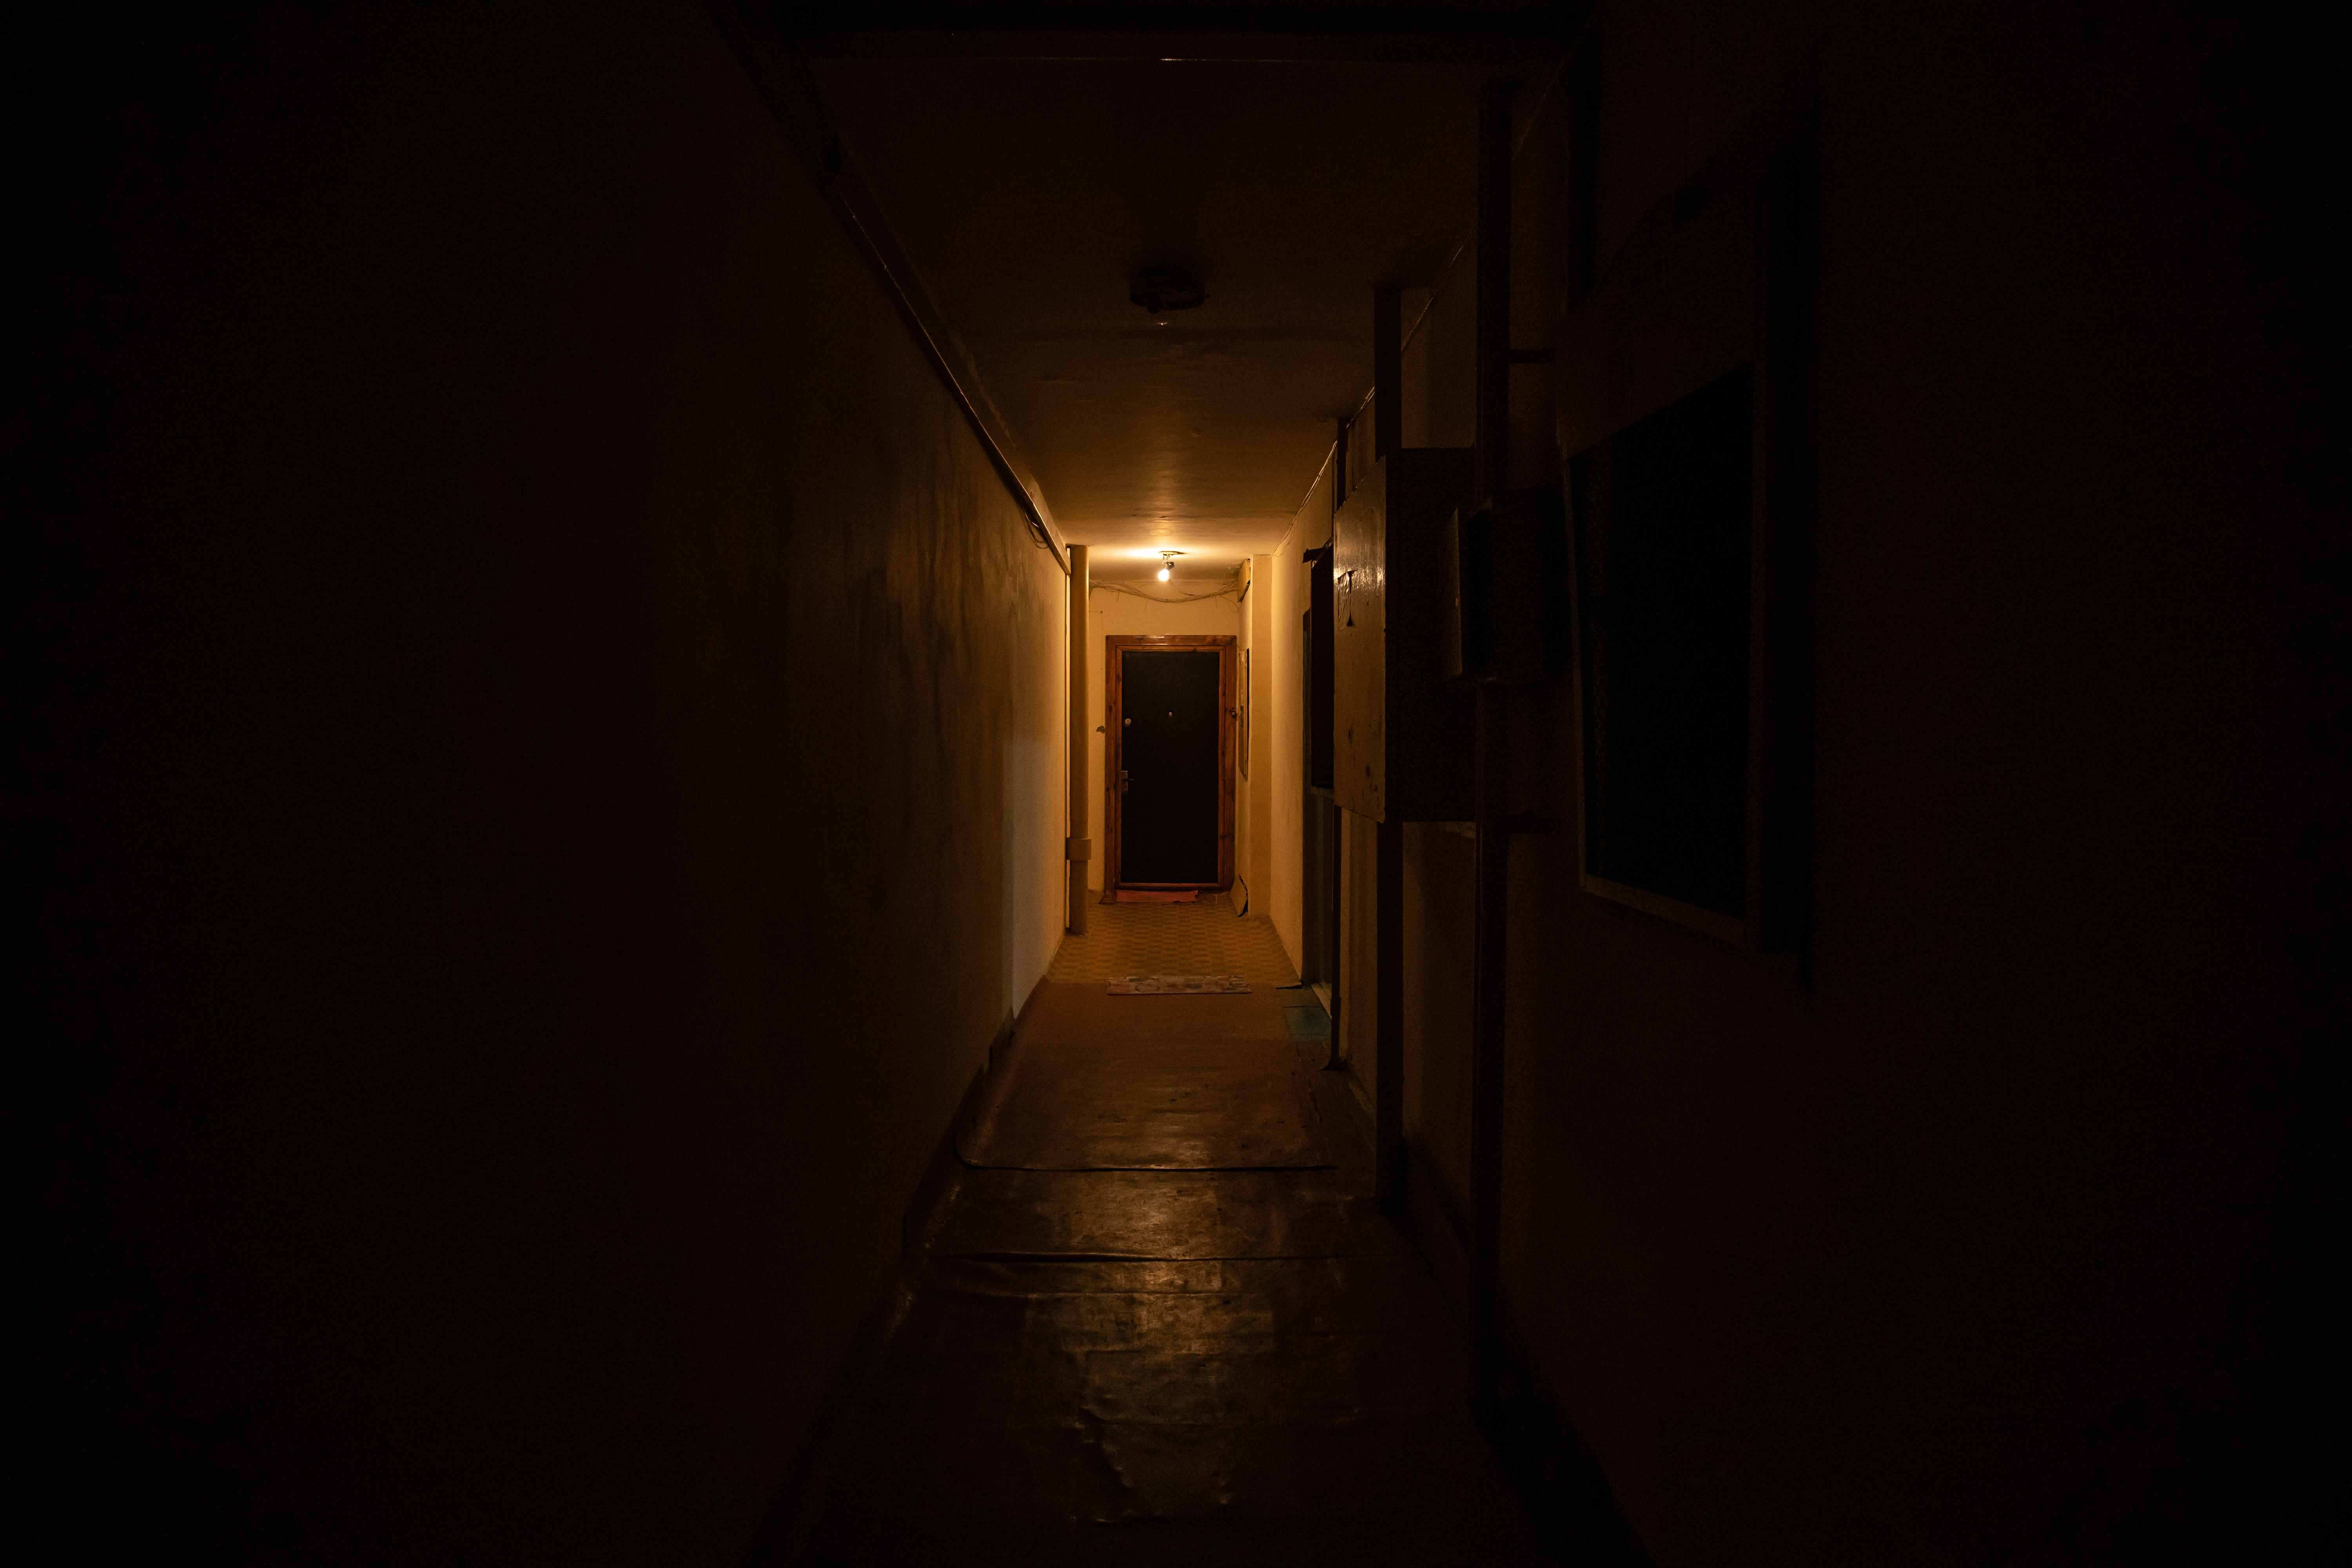 Empty dark corridor with light at the end | Source: Shutterstock.com